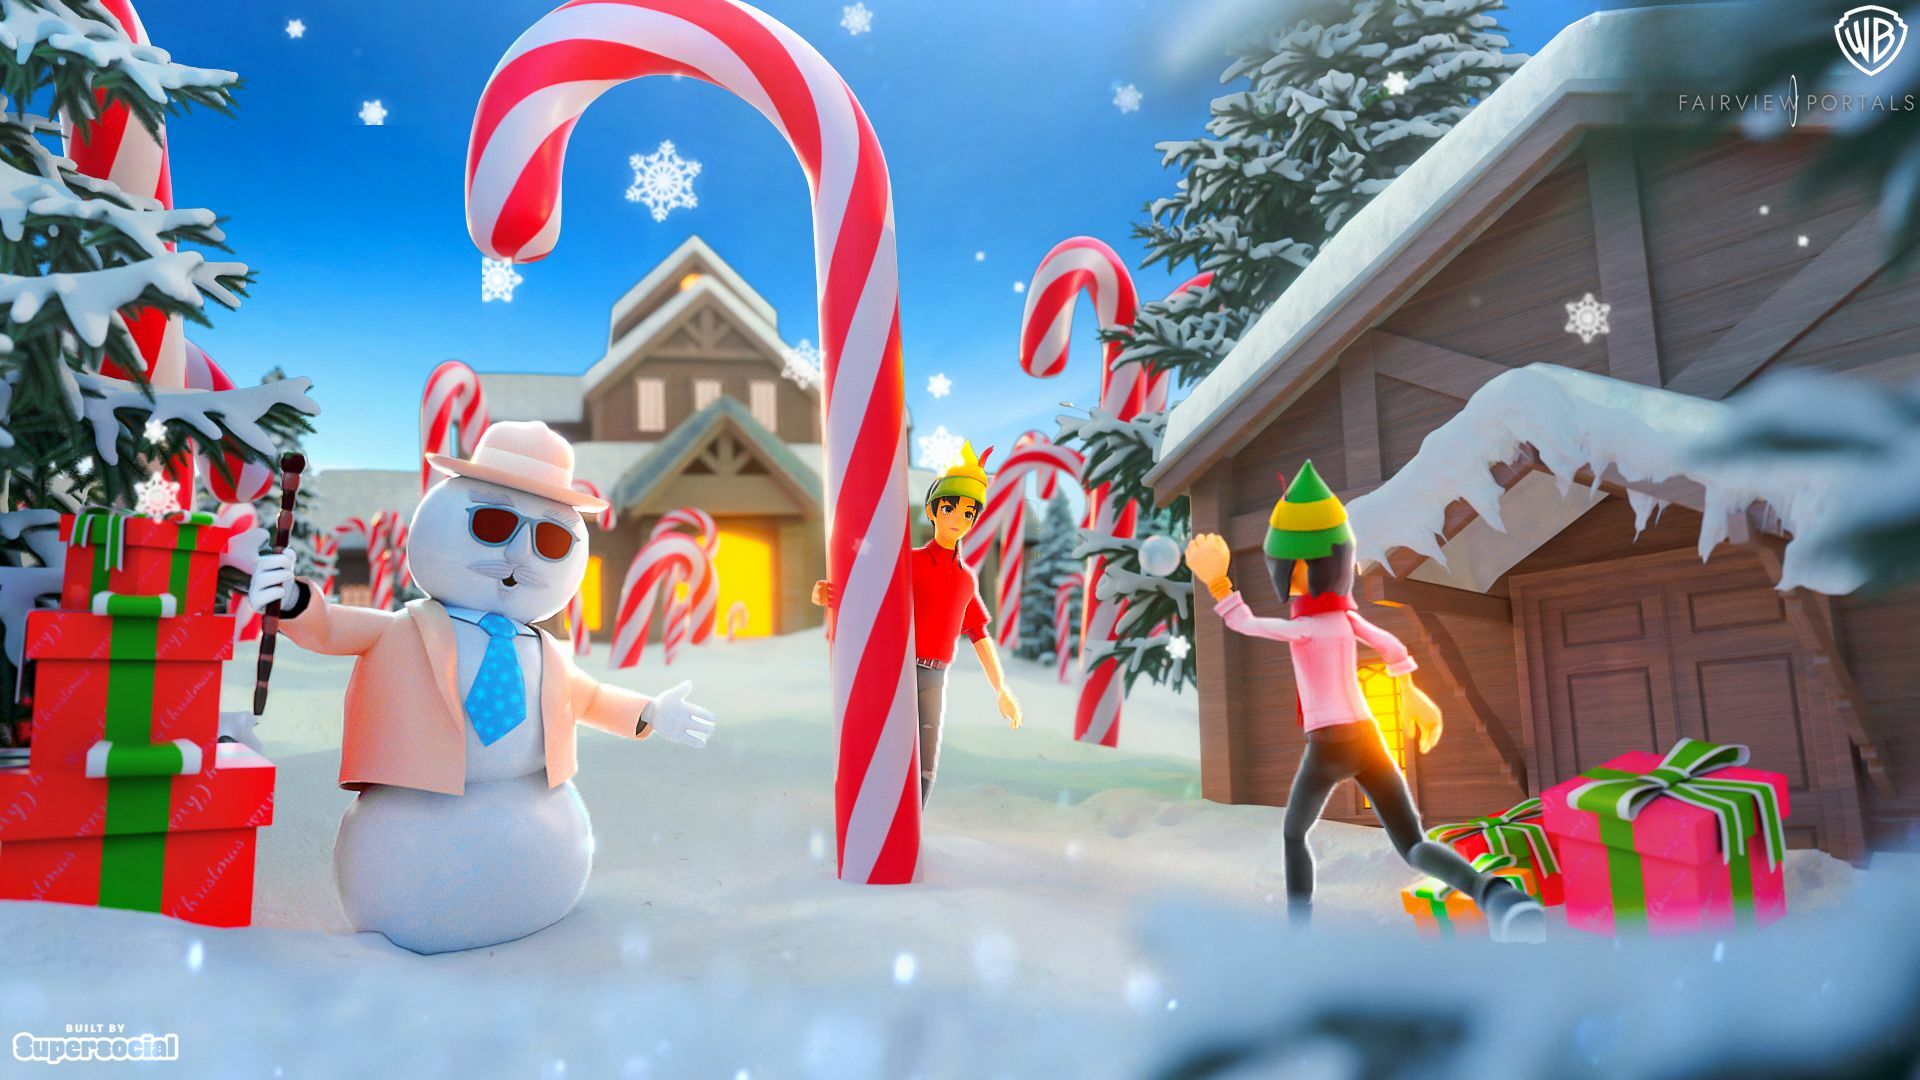 The 'Elf' experience in Roblox, with a digital snowman surrounded by candy canes.